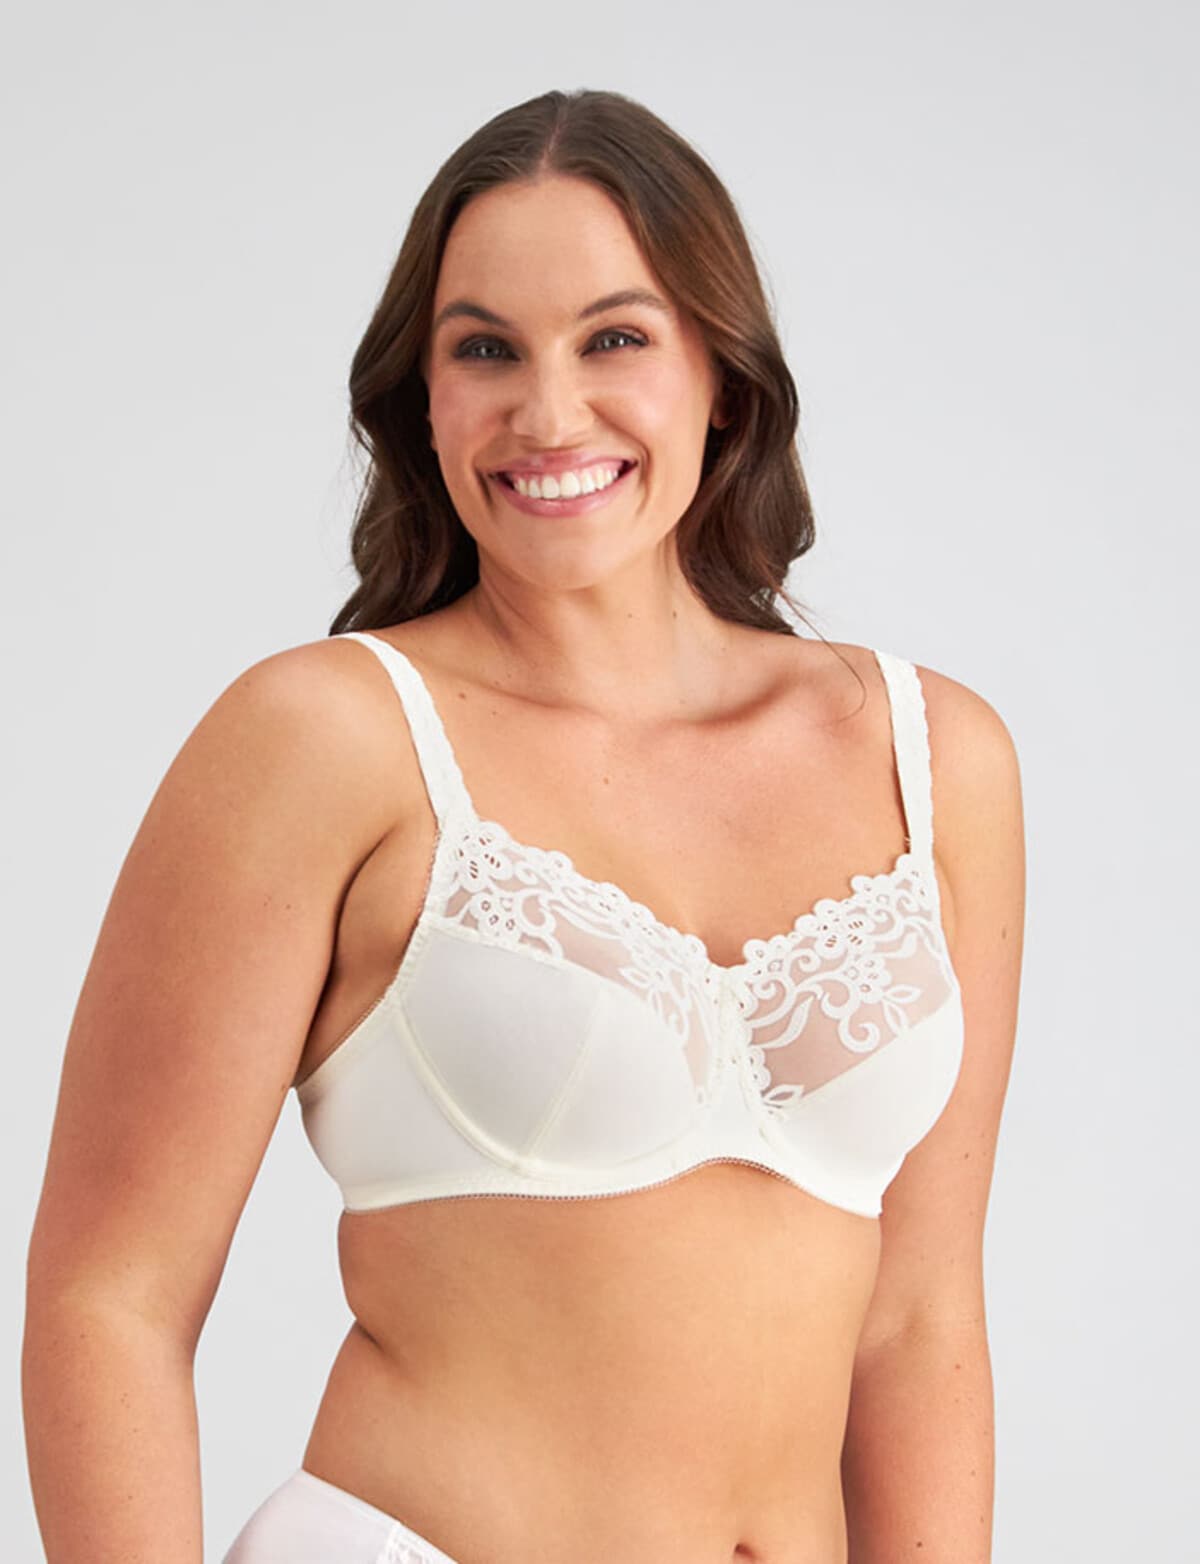 Fayreform Women's Full Cup Bras - Clothing